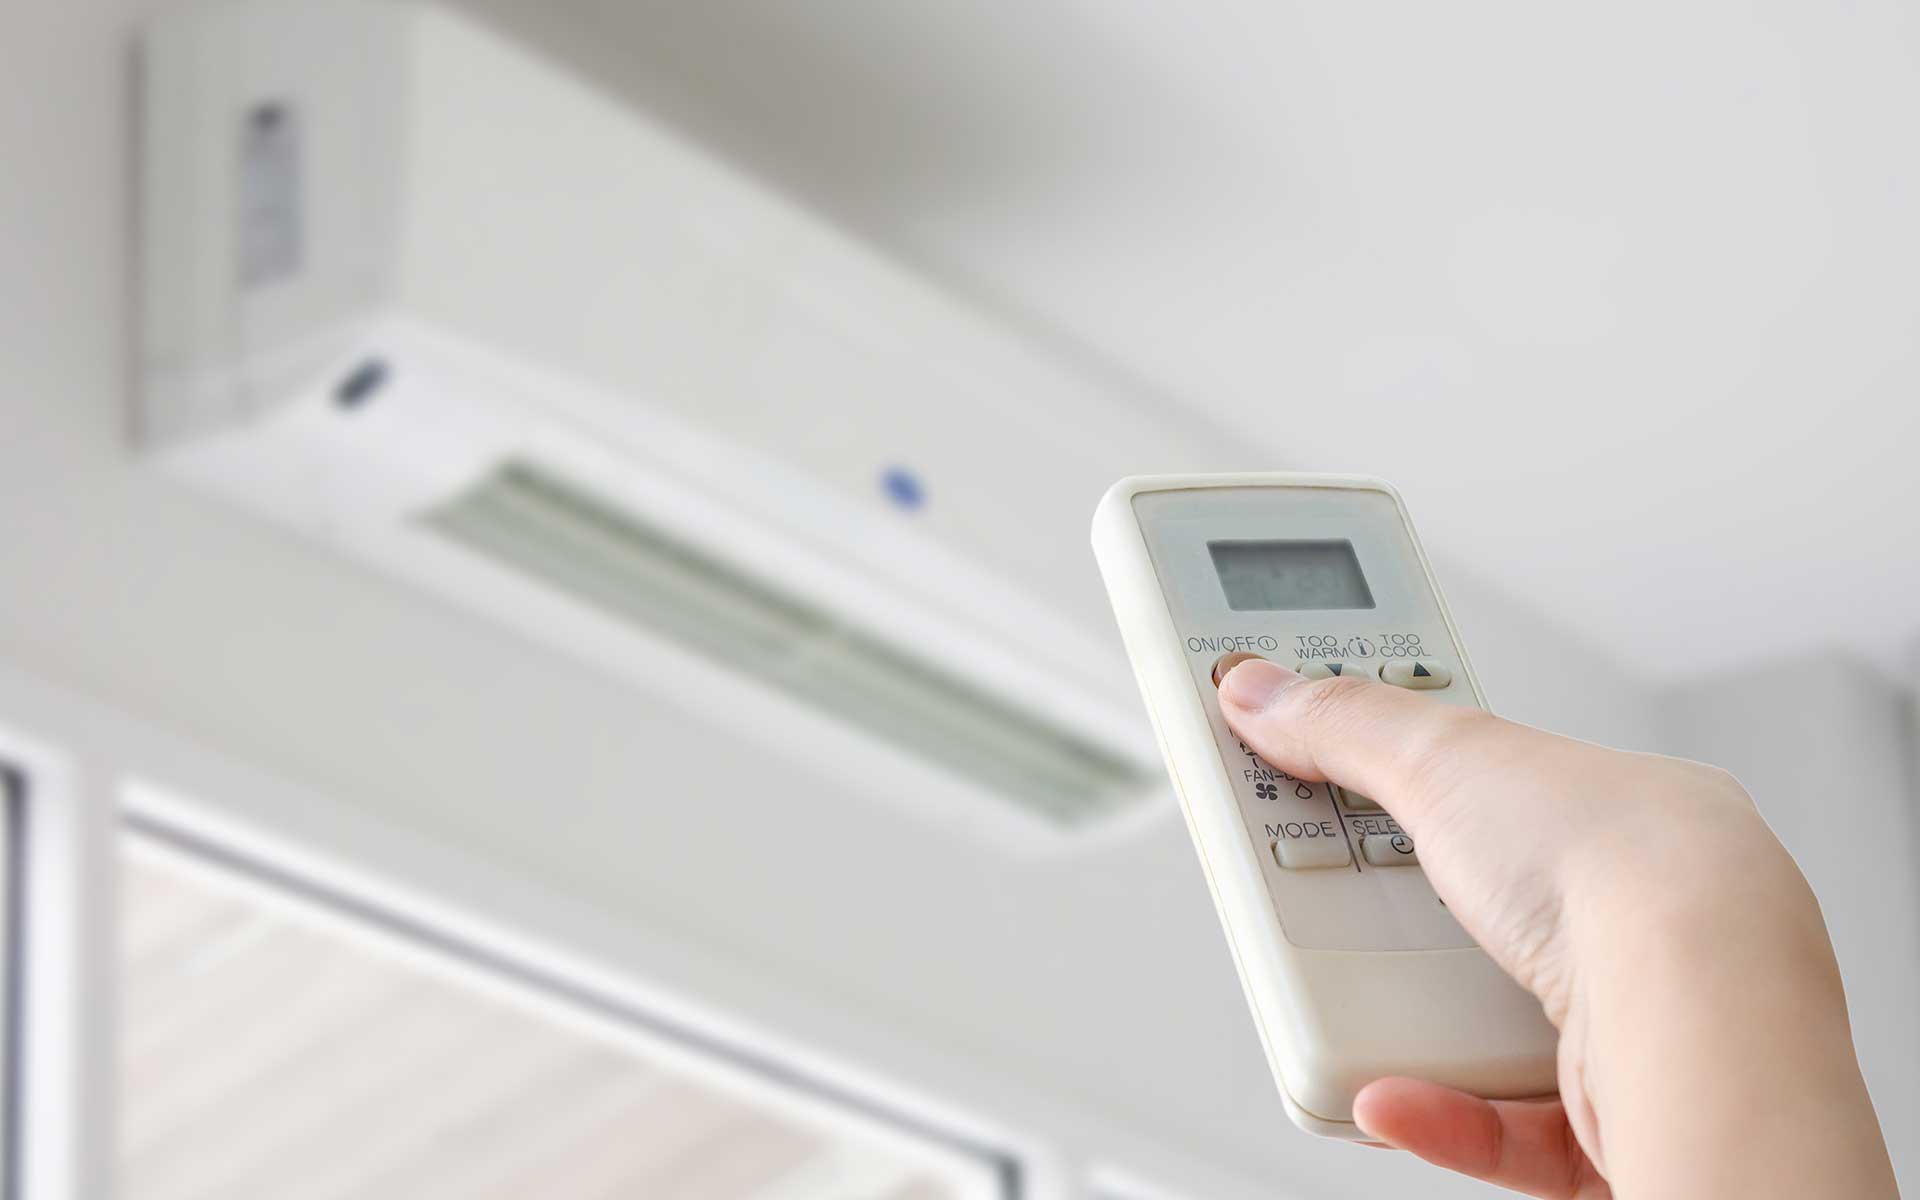 Image - Person using remote control to power on a heating and cooling unit